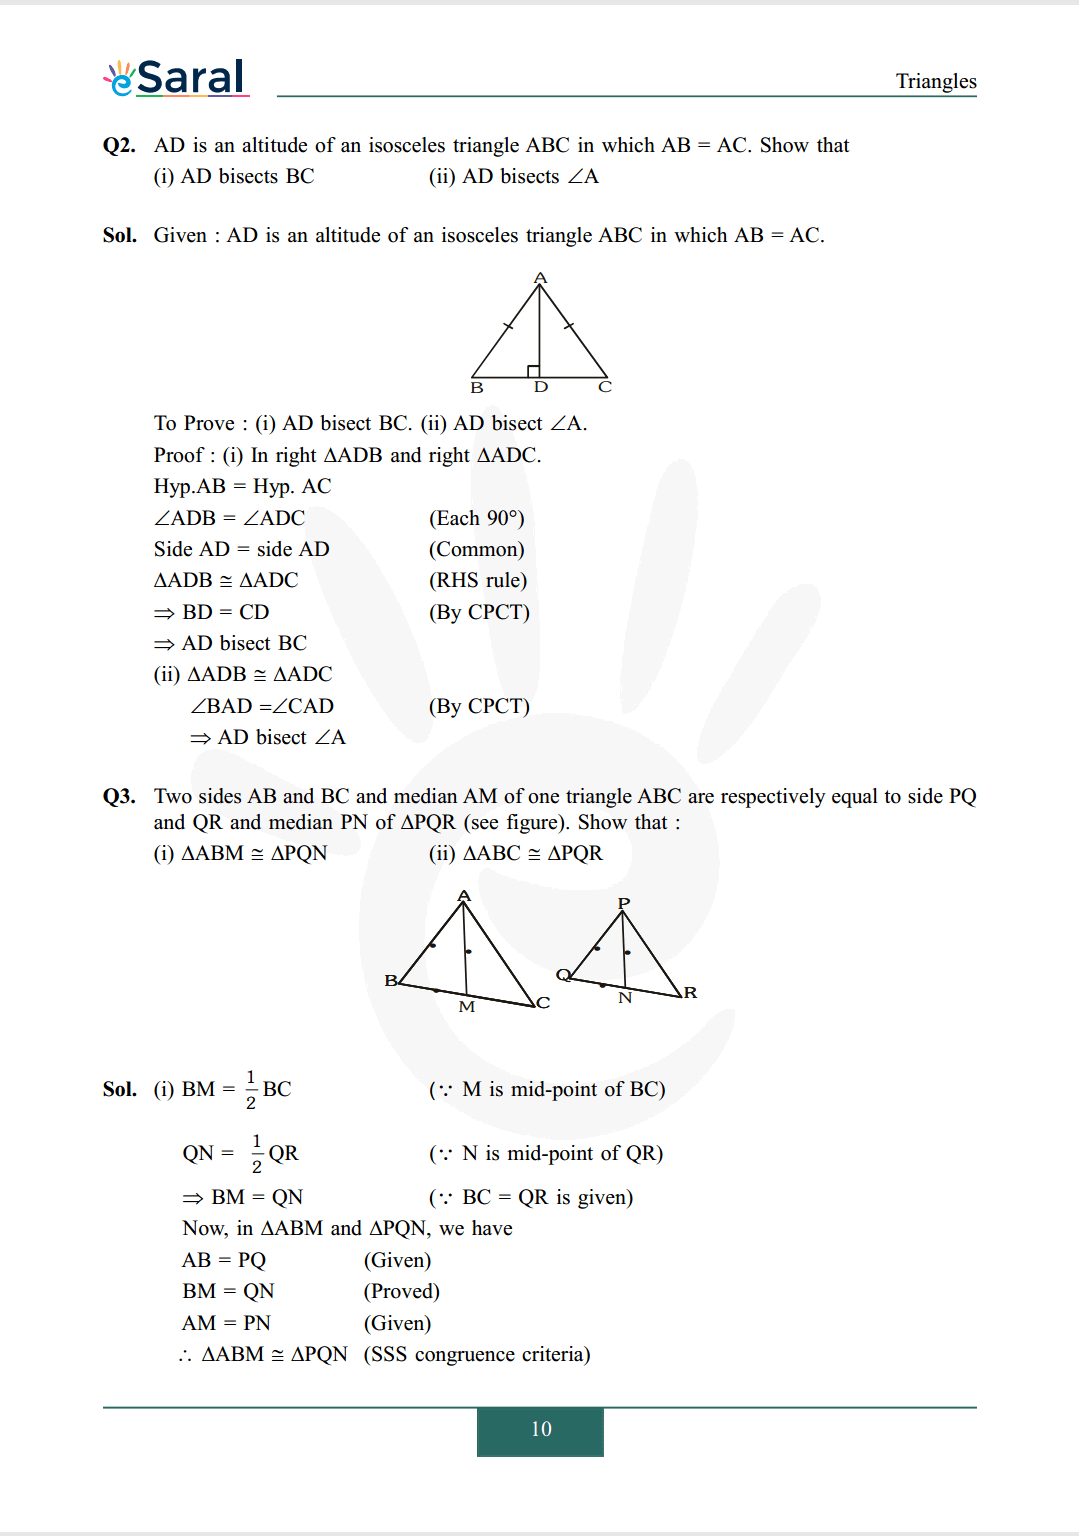 Class 9 maths chapter 7 exercise 7.3 solutions Image 2